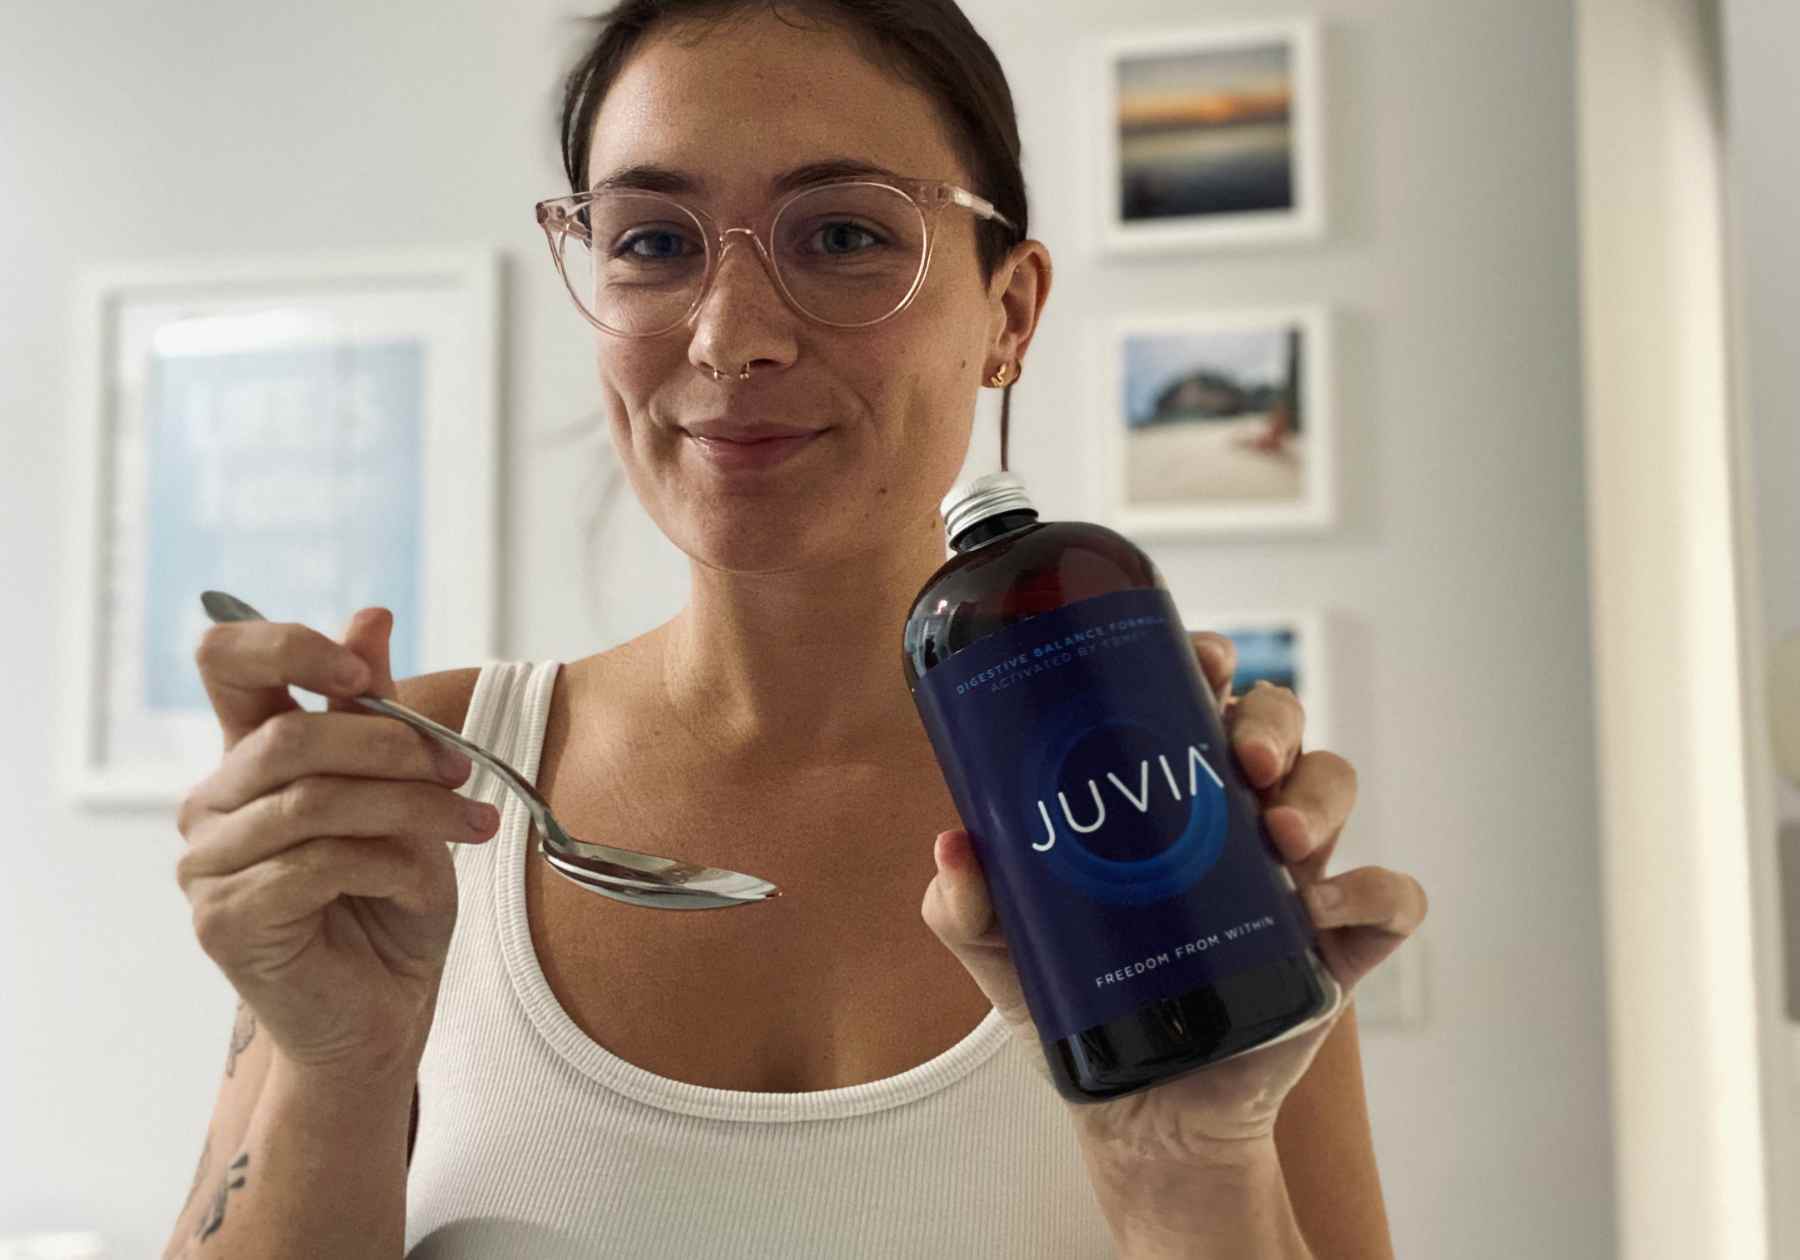 Juvia review: My honest 3-month experience